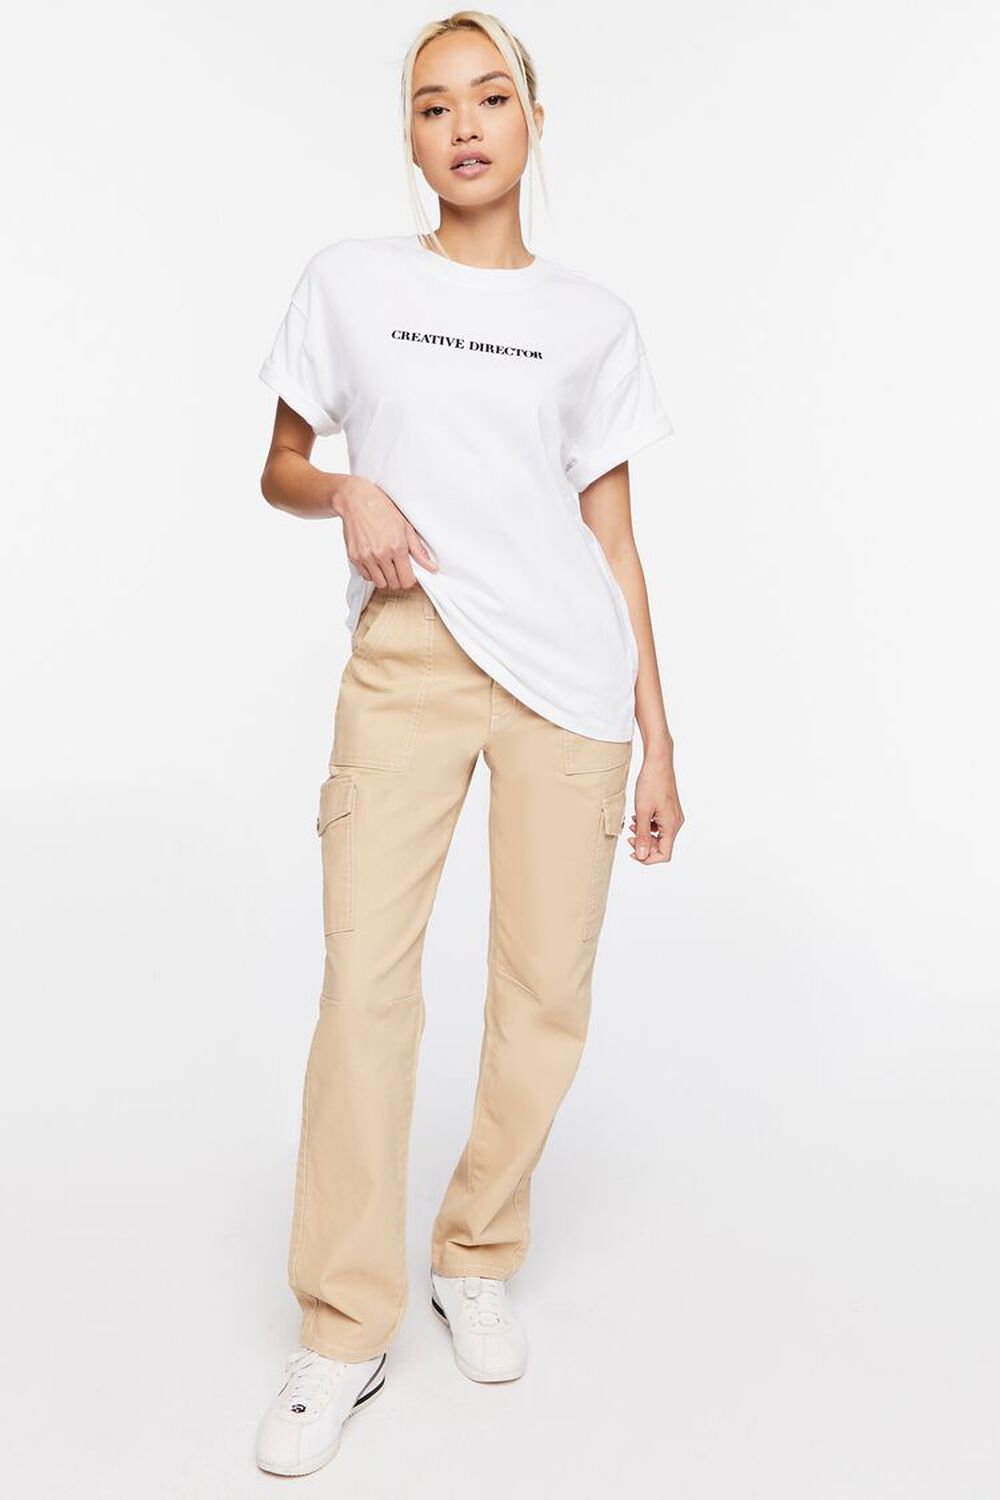 Creative Director Graphic Tee | Forever 21 (US)